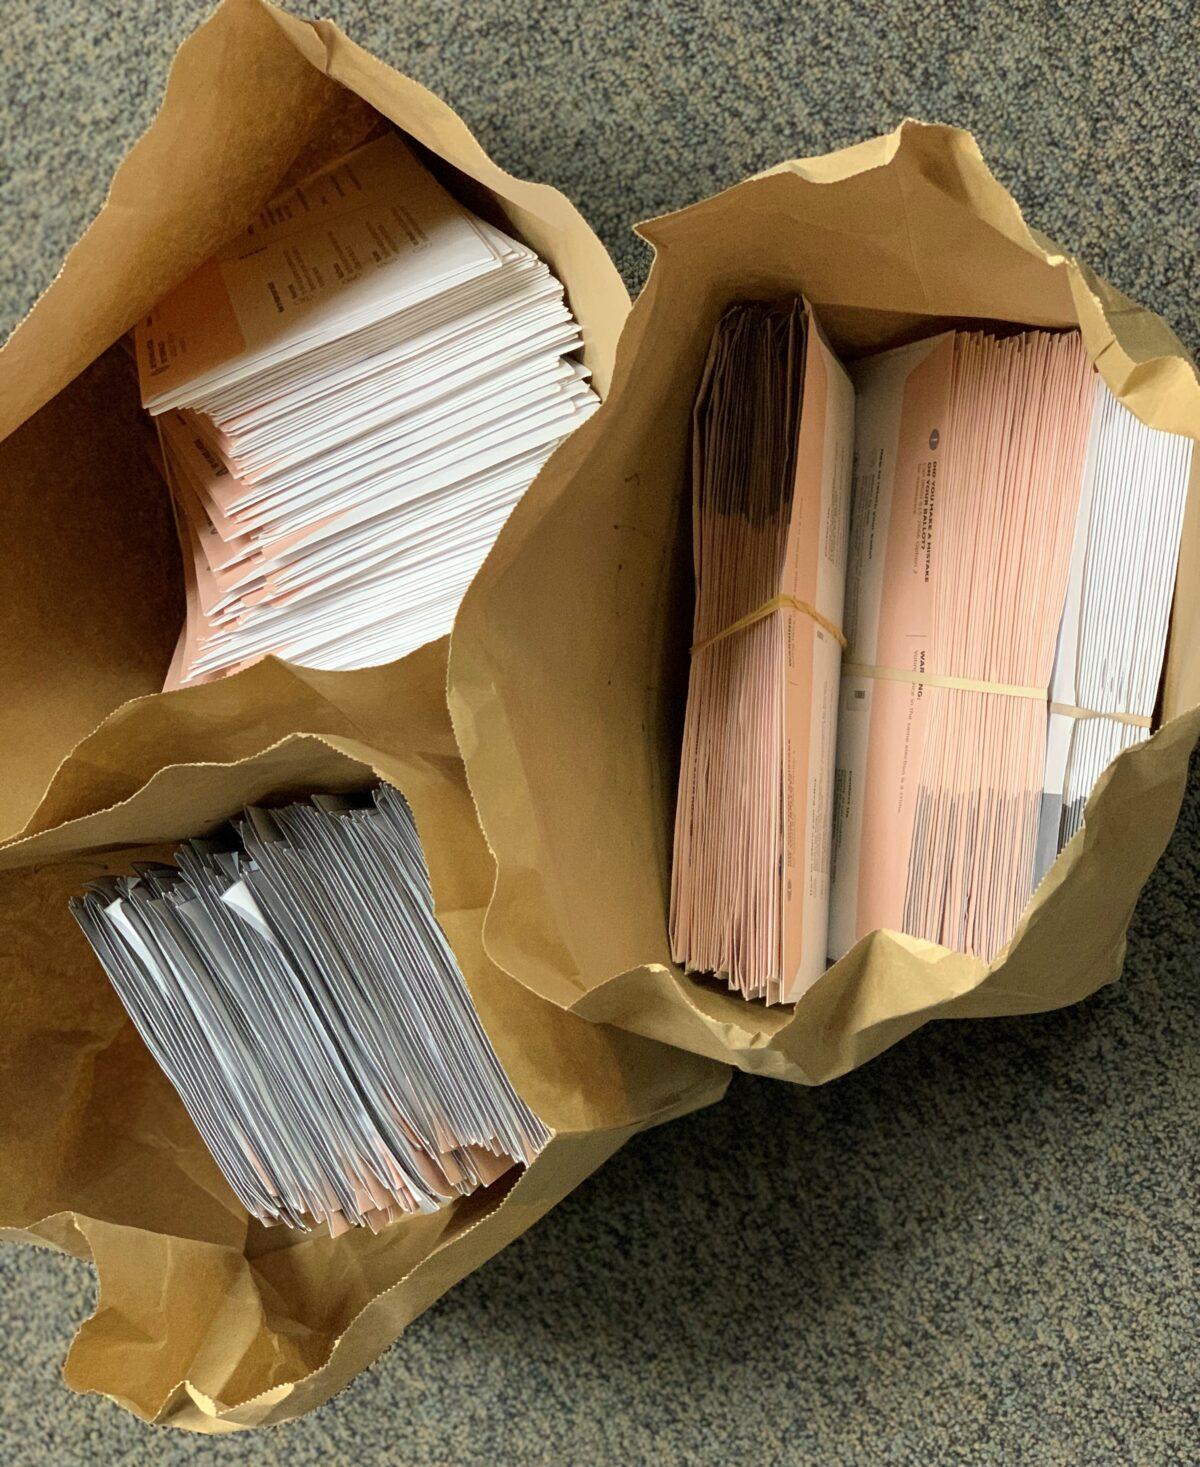 More than 300 mail-in ballots were found in a suspect's car in Torrance, Calif., on Aug. 16, 2021. (Courtesy Torrance Police Department)